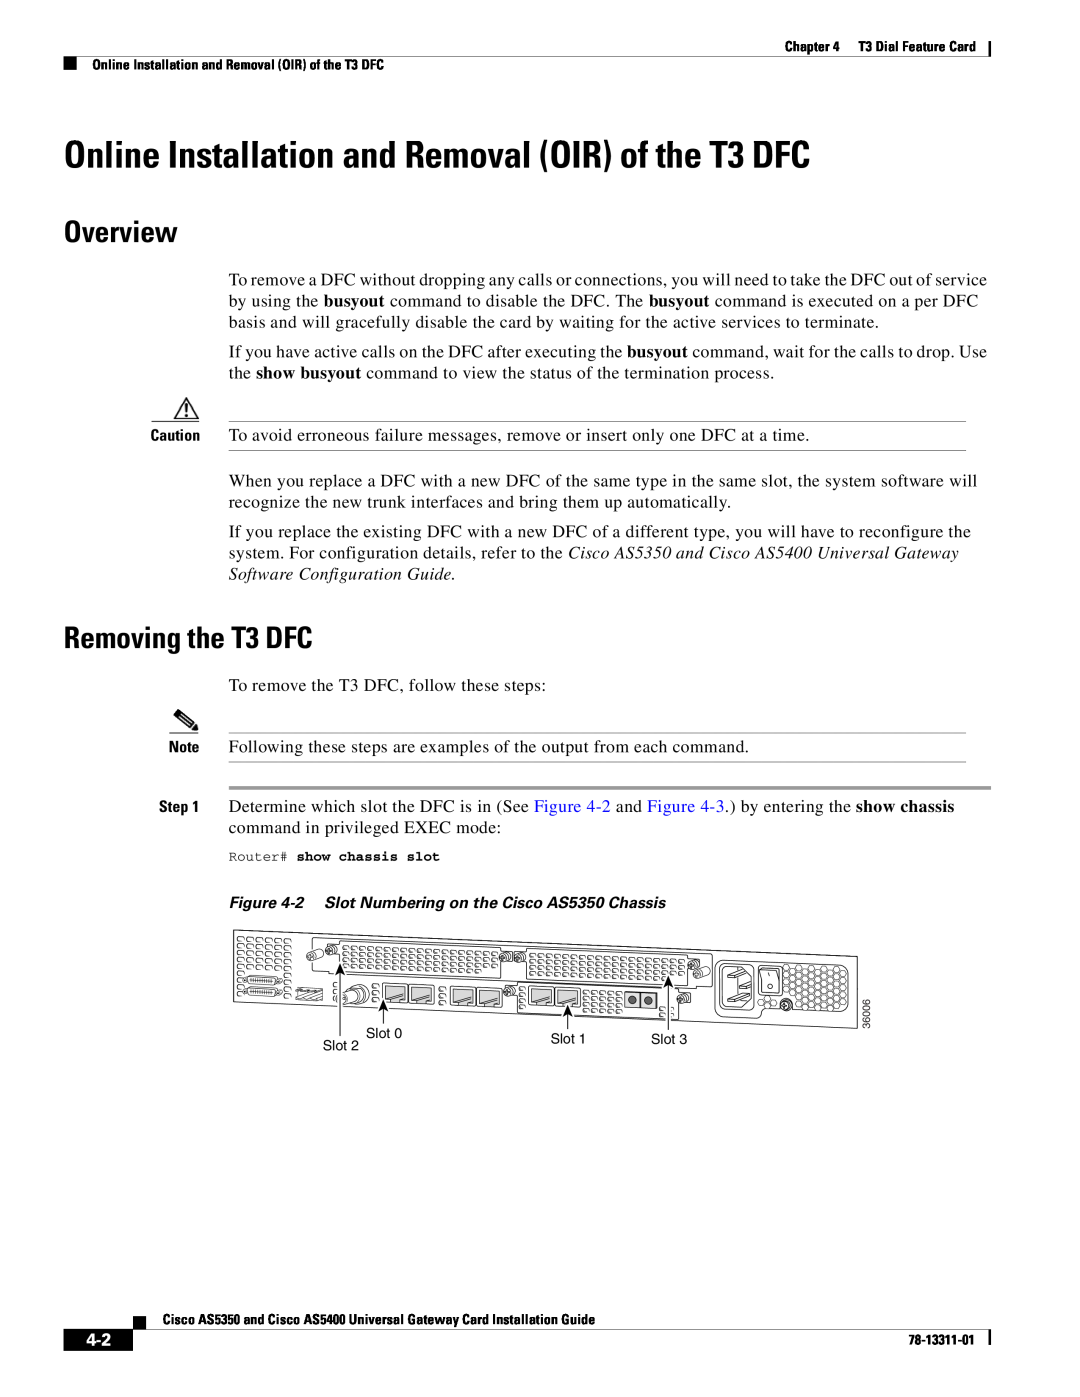 Cisco Systems AS5400 manual Online Installation and Removal OIR of the T3 DFC, Removing the T3 DFC, Overview 